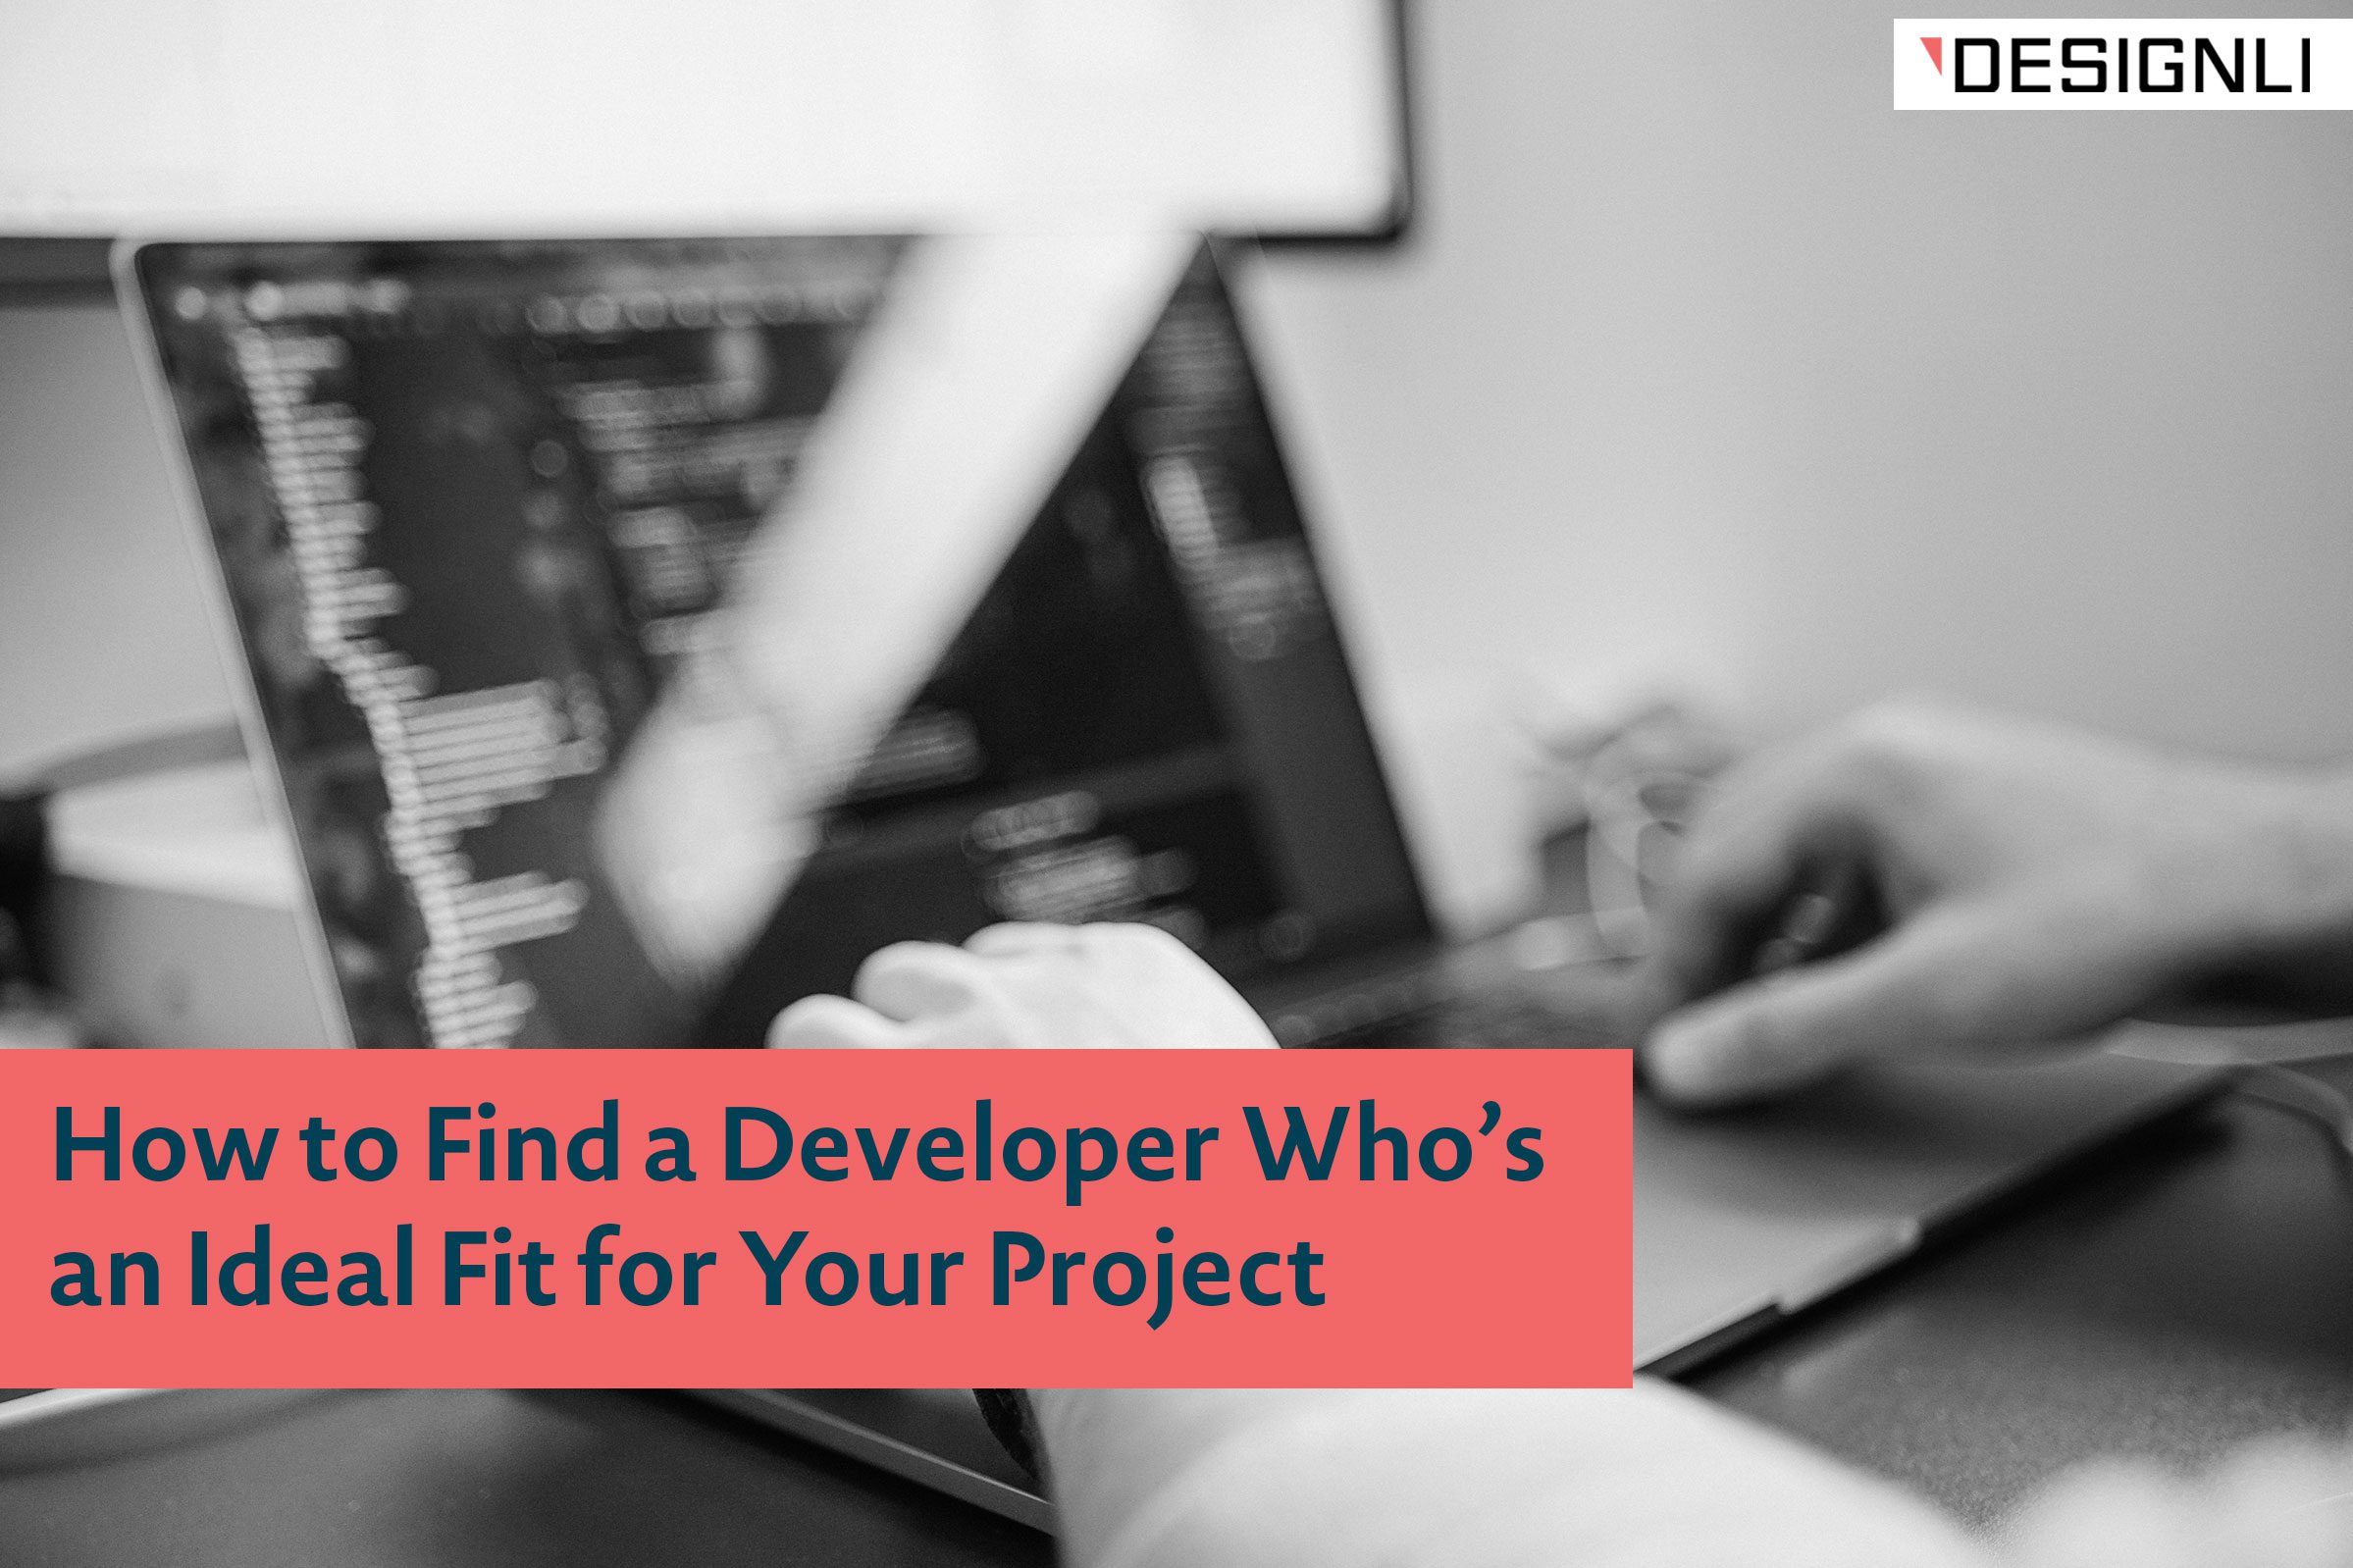 How to Find a Developer Who’s an Ideal Fit for Your Project